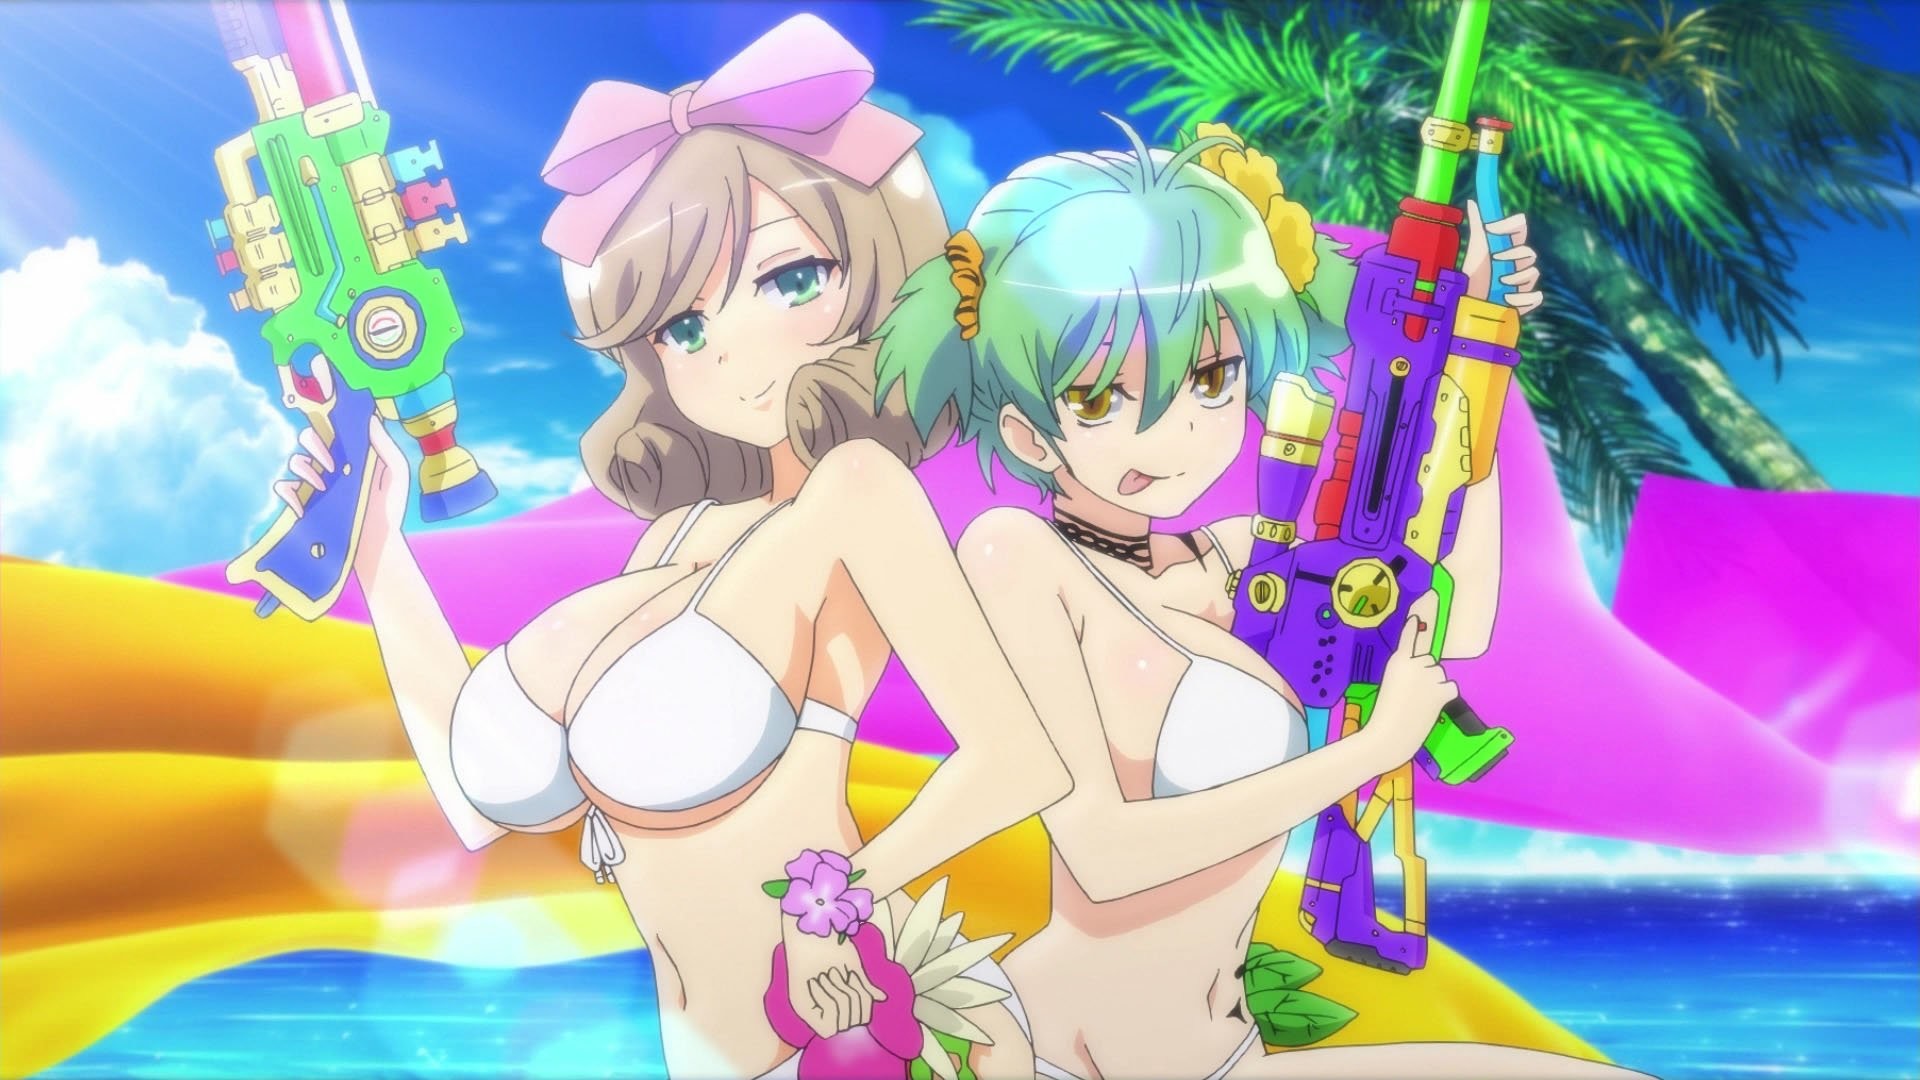 1920x1080 The Senran Kagura series is rife with hilarious, sometimes perverse  situations, and that's what makes it so much fun. Yes, most of the games  feature ...